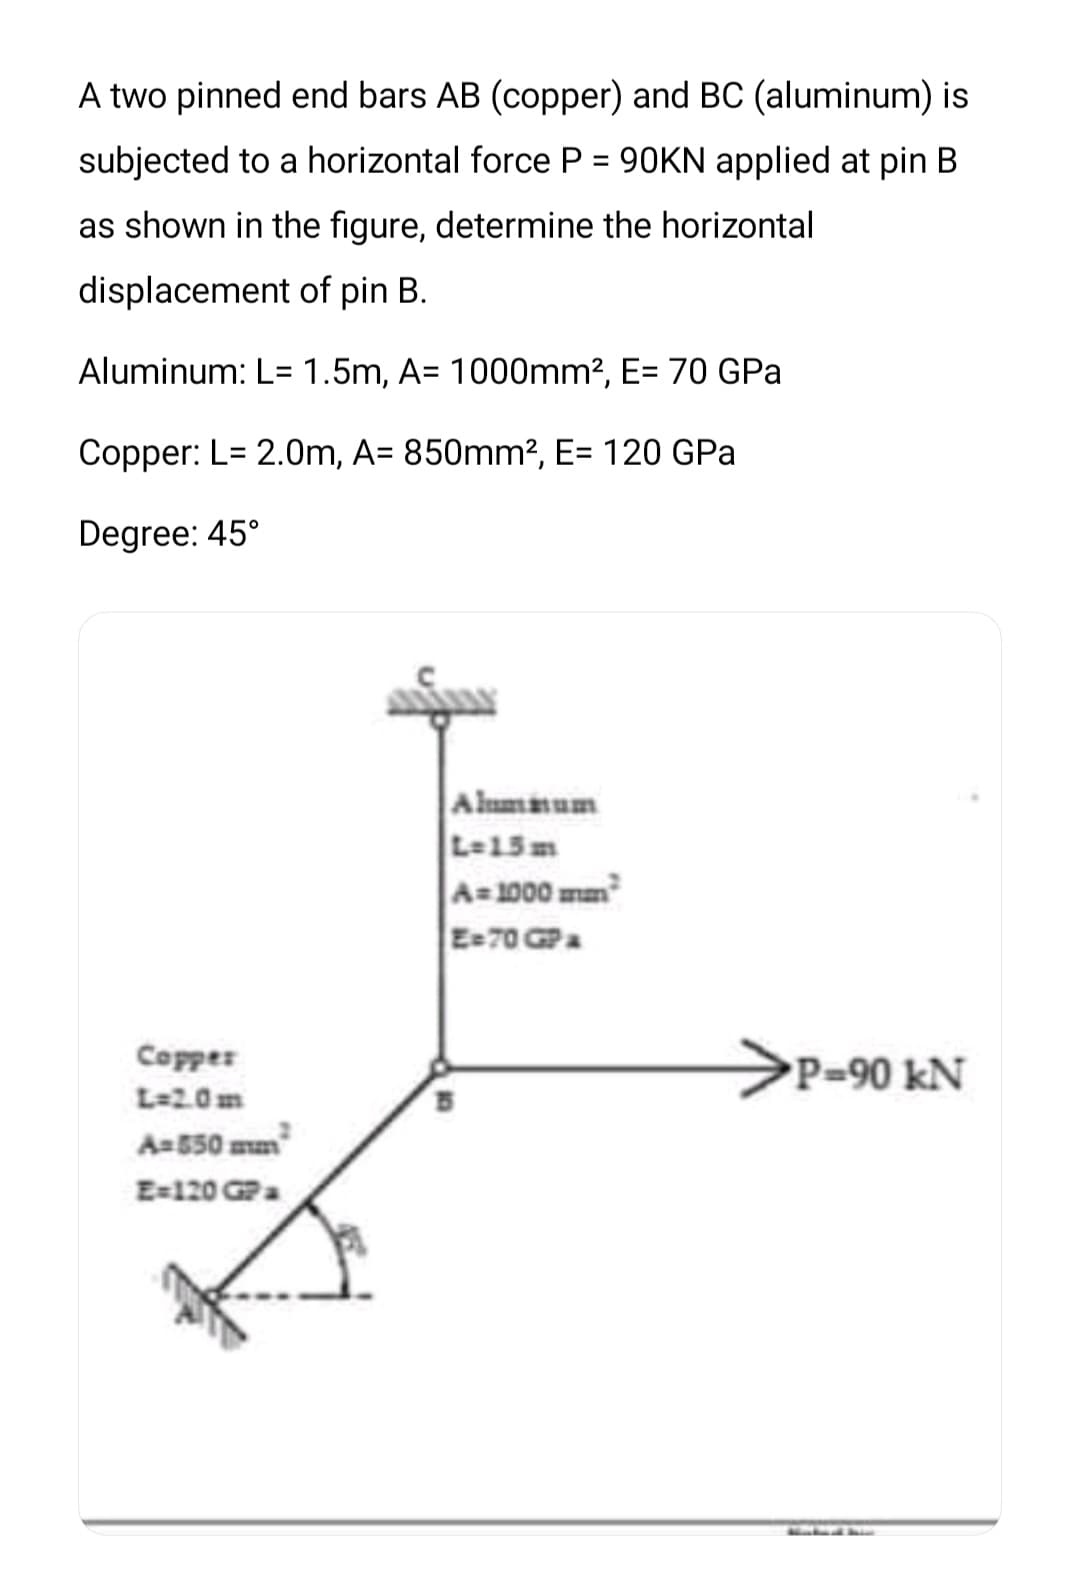 A two pinned end bars AB (copper) and BC (aluminum) is
subjected to a horizontal force P = 90KN applied at pin B
%3D
as shown in the figure, determine the horizontal
displacement of pin B.
Aluminum: L= 1.5m, A= 1000mm2, E= 70 GPa
Copper: L= 2.0m, A= 850mm², E= 120 GPa
Degree: 45°
Alumaum
L-15m
A=1000 mm
E-70 GPa
>P=90 kN
Copper
L=2.0m
Aa550 mm
E=120 GPa
